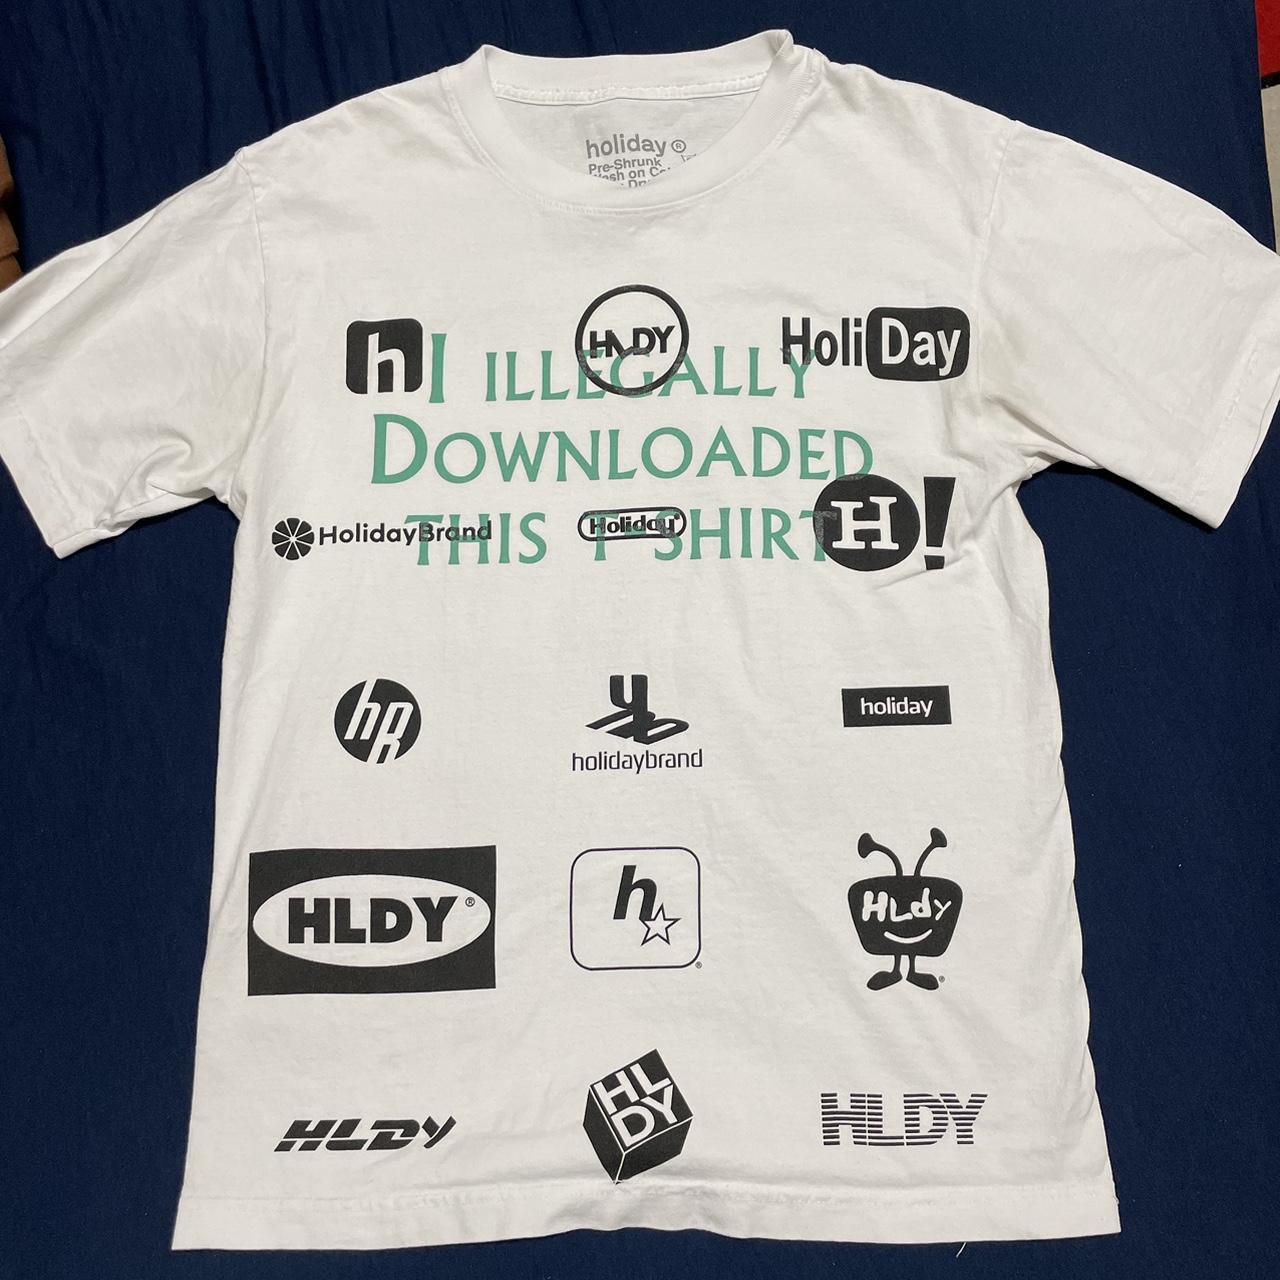 Holiday The Label Men's White and Black T-shirt